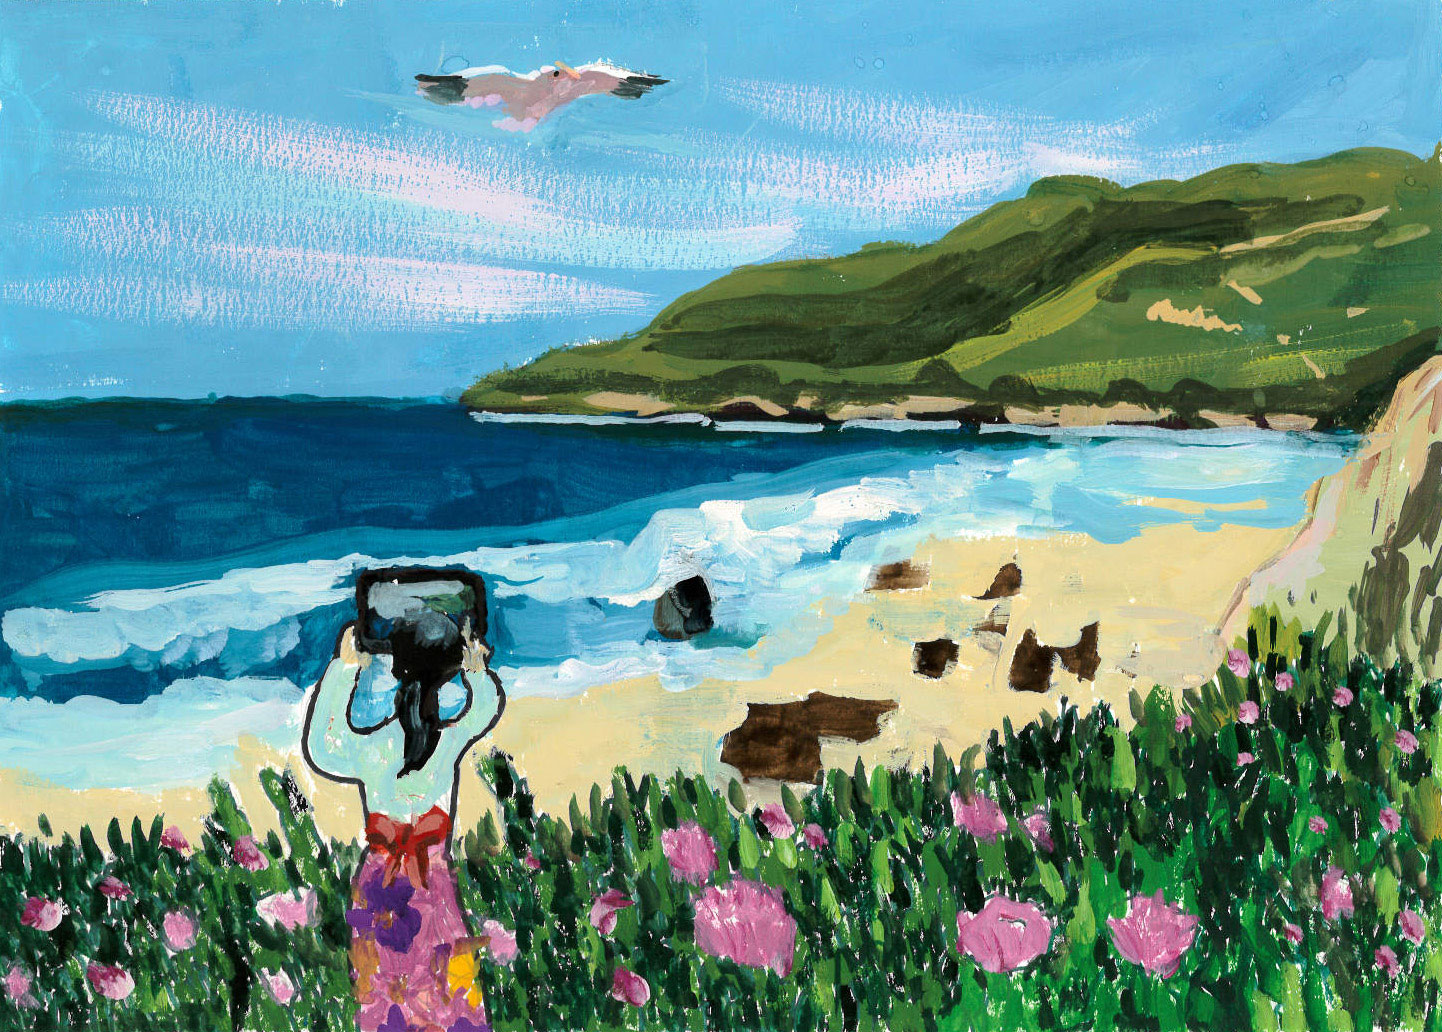 Painting of a girl taking a photo of a beach, flowers in foreground and a gull flying above